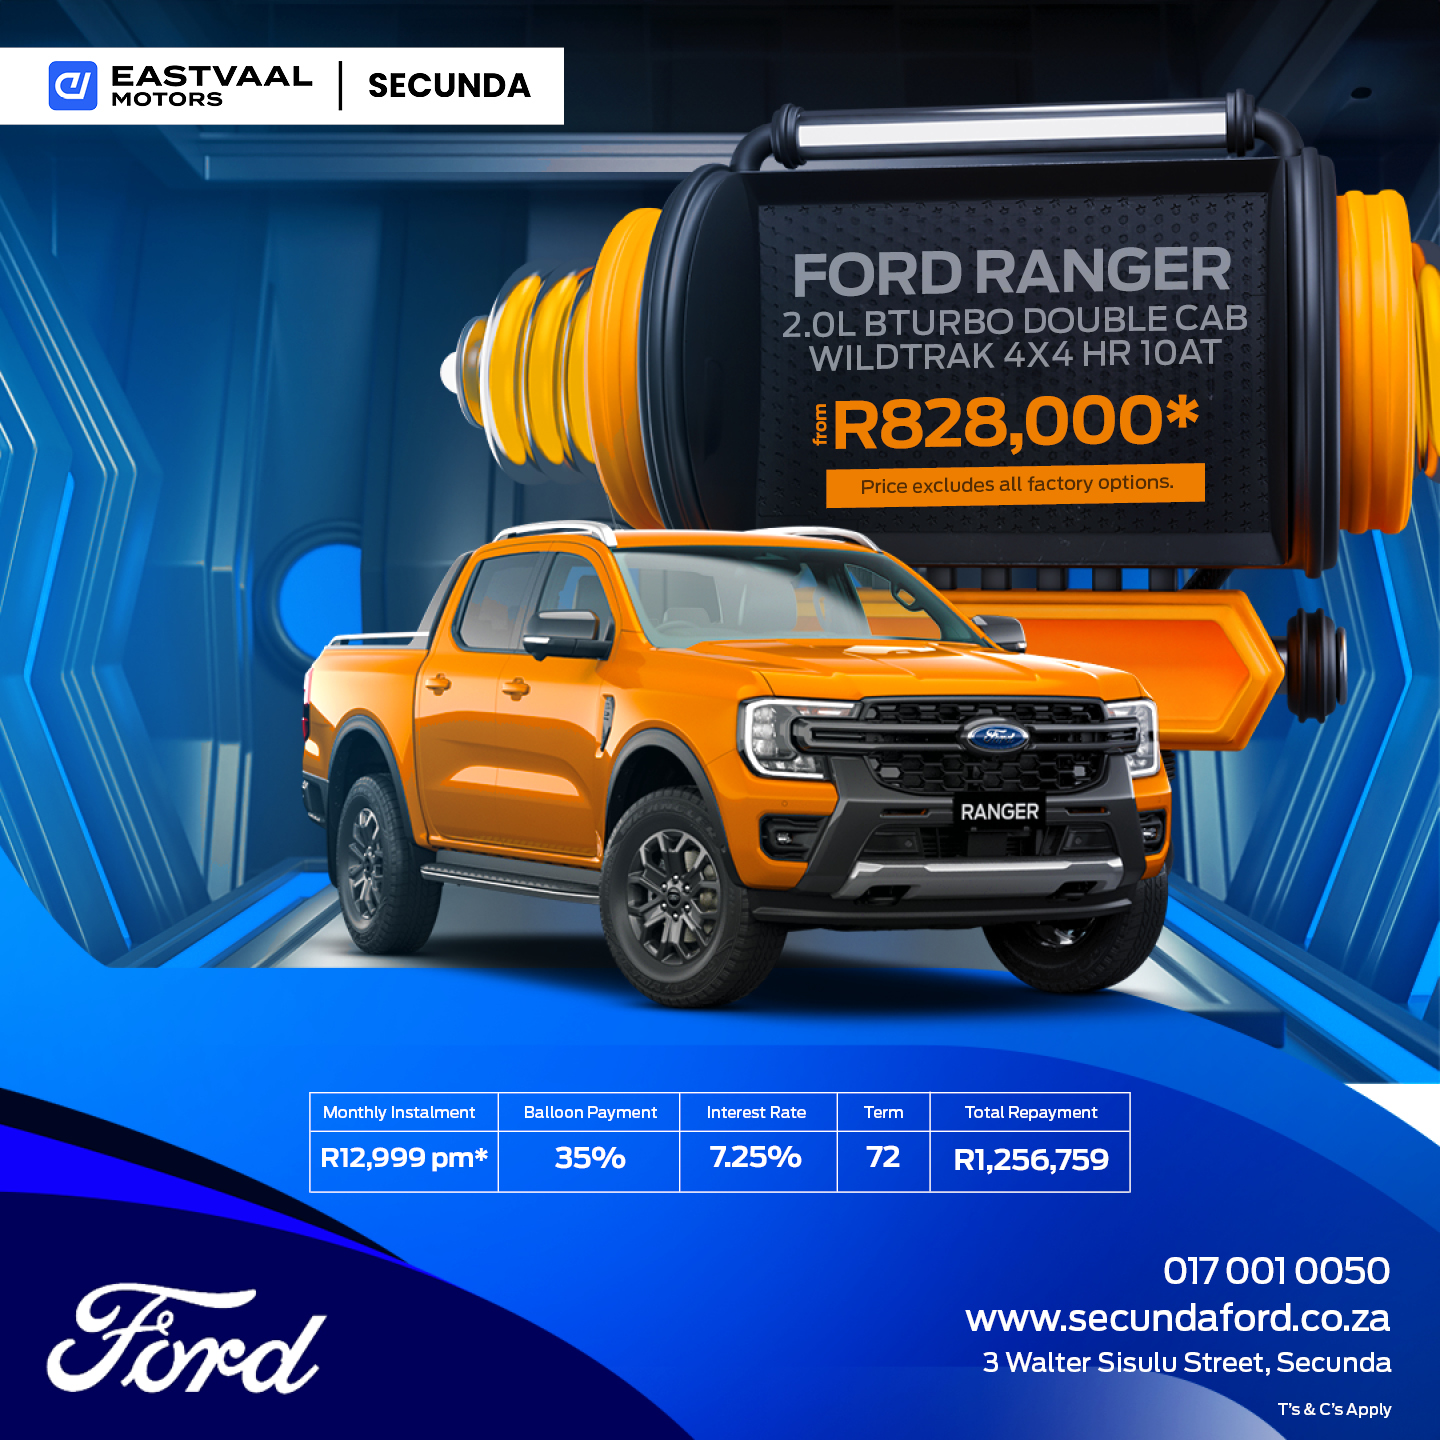 Ford Ranger 2.0L Turbo Double Cab WildTrak 4×4 HR 10AT image from 